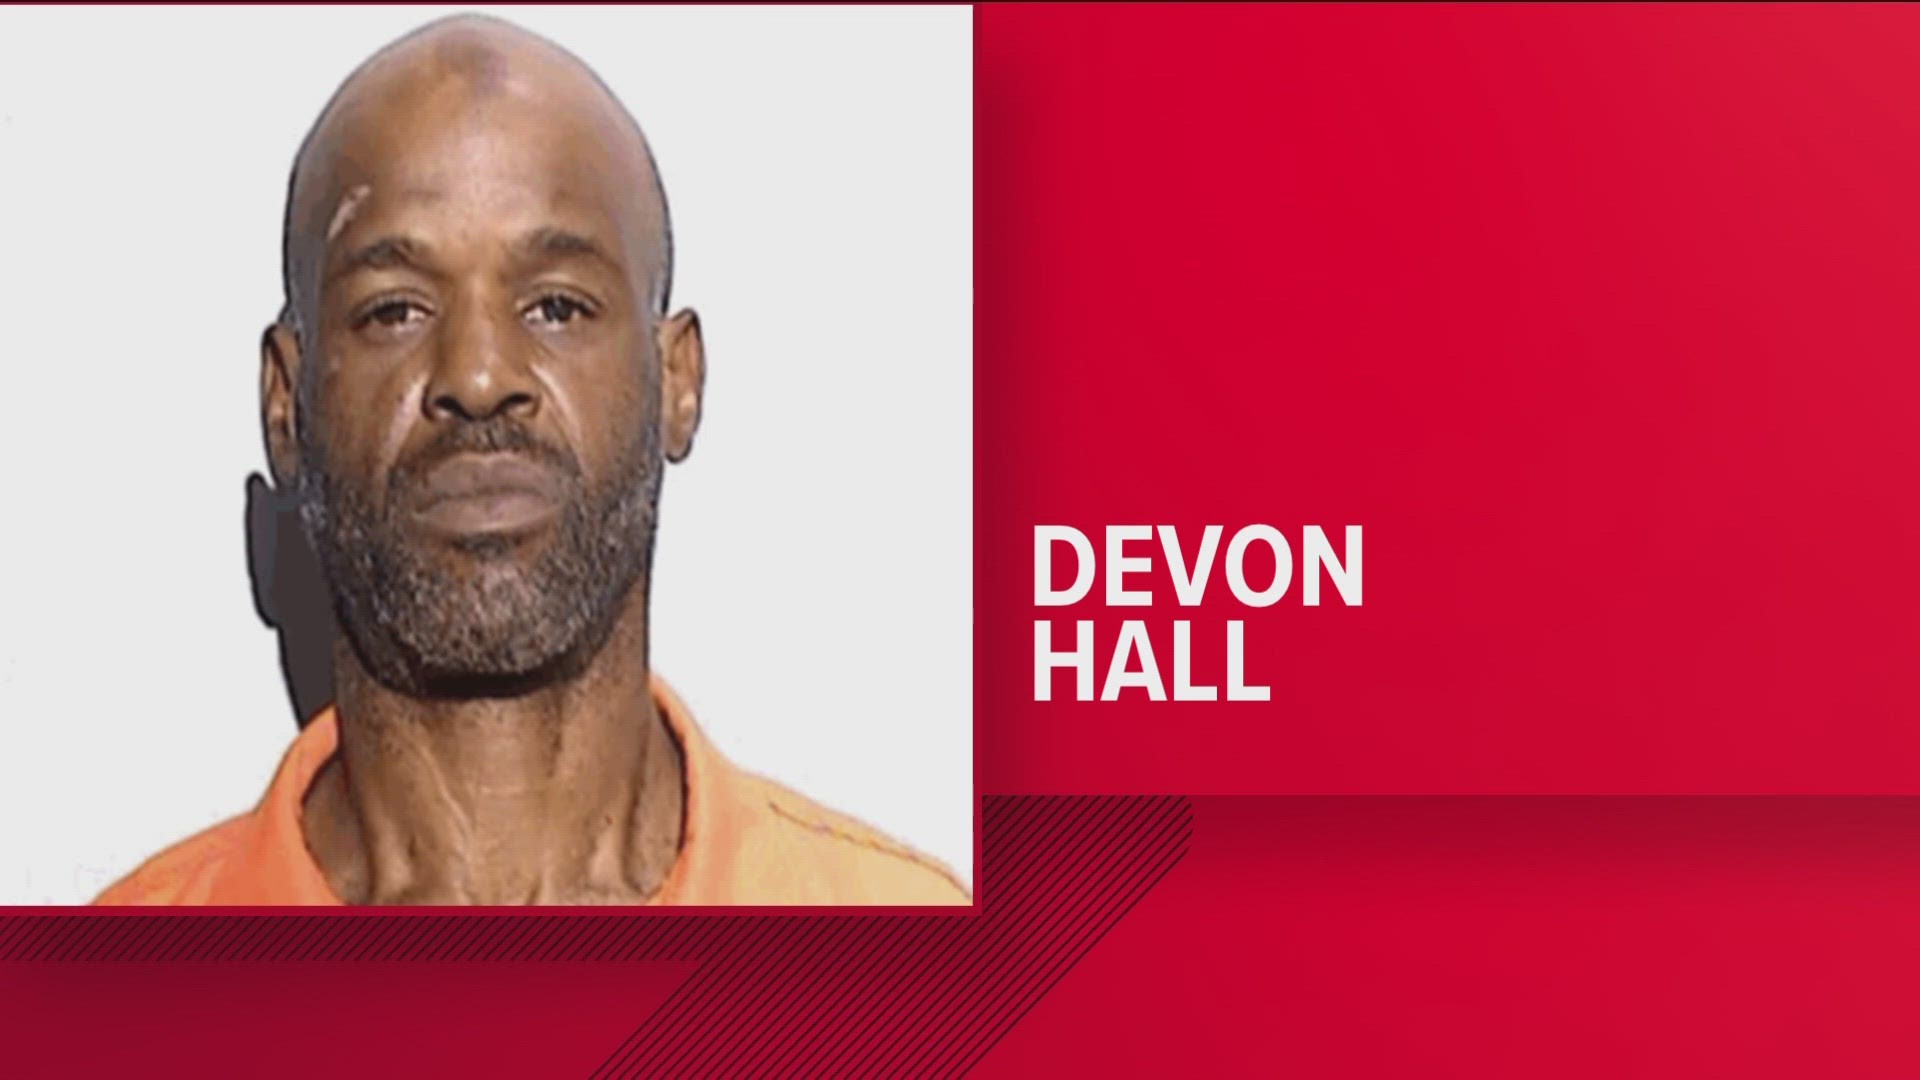 Devon Hall, 48, was arrested Wednesday and charged with aggravated murder and aggravated arson for the Aug. 10 death of 32-year-old Ronda Scott.